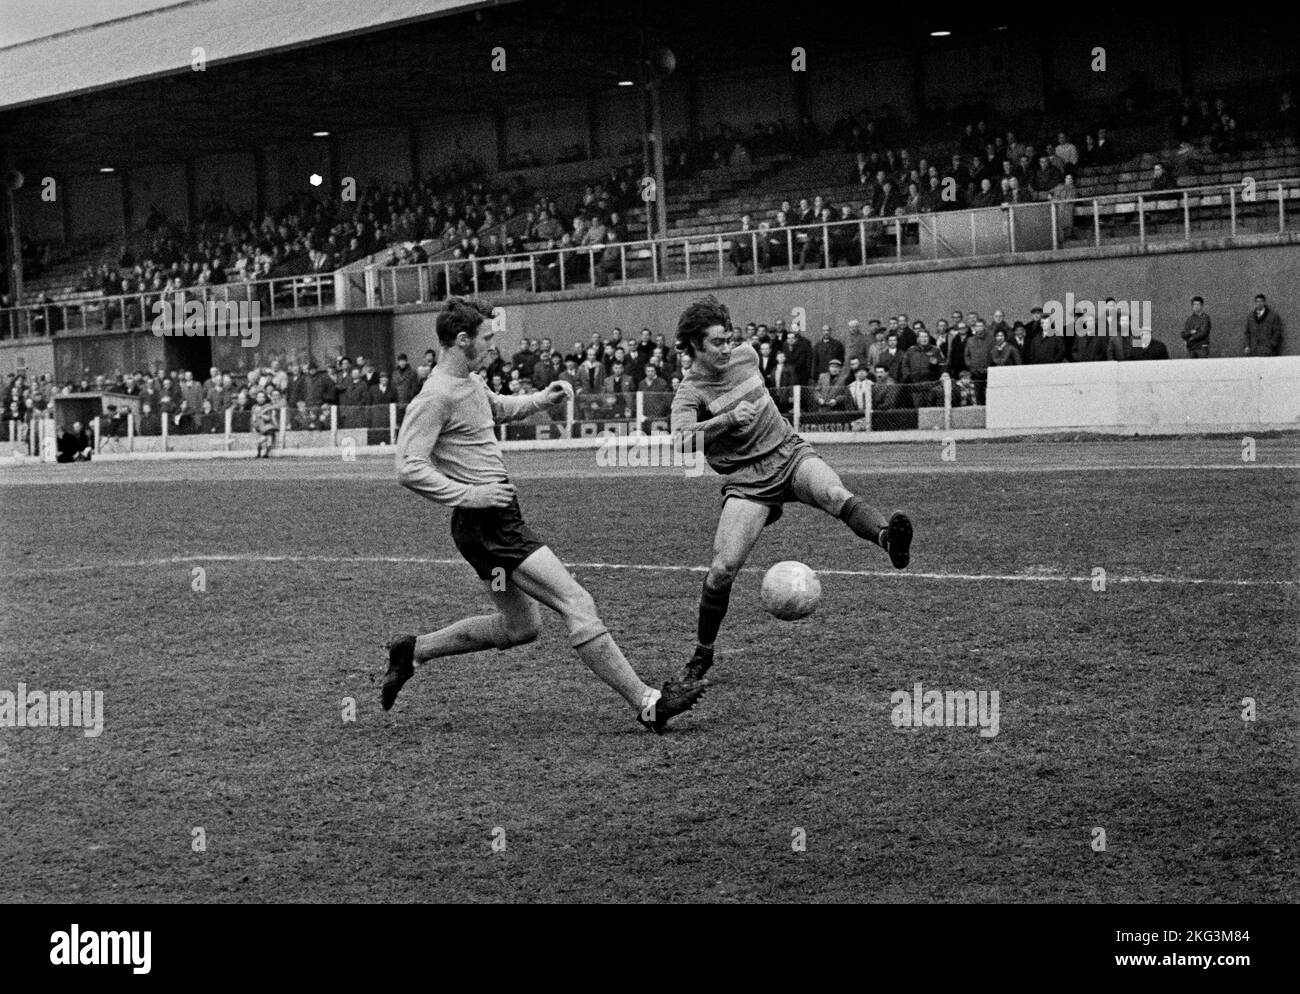 Romford FC v Barnet FC 21 March 1970 at Brooklands Sports Ground Romford Essex UK Southern League Prtemier Division Scans made in 2022 Stock Photo